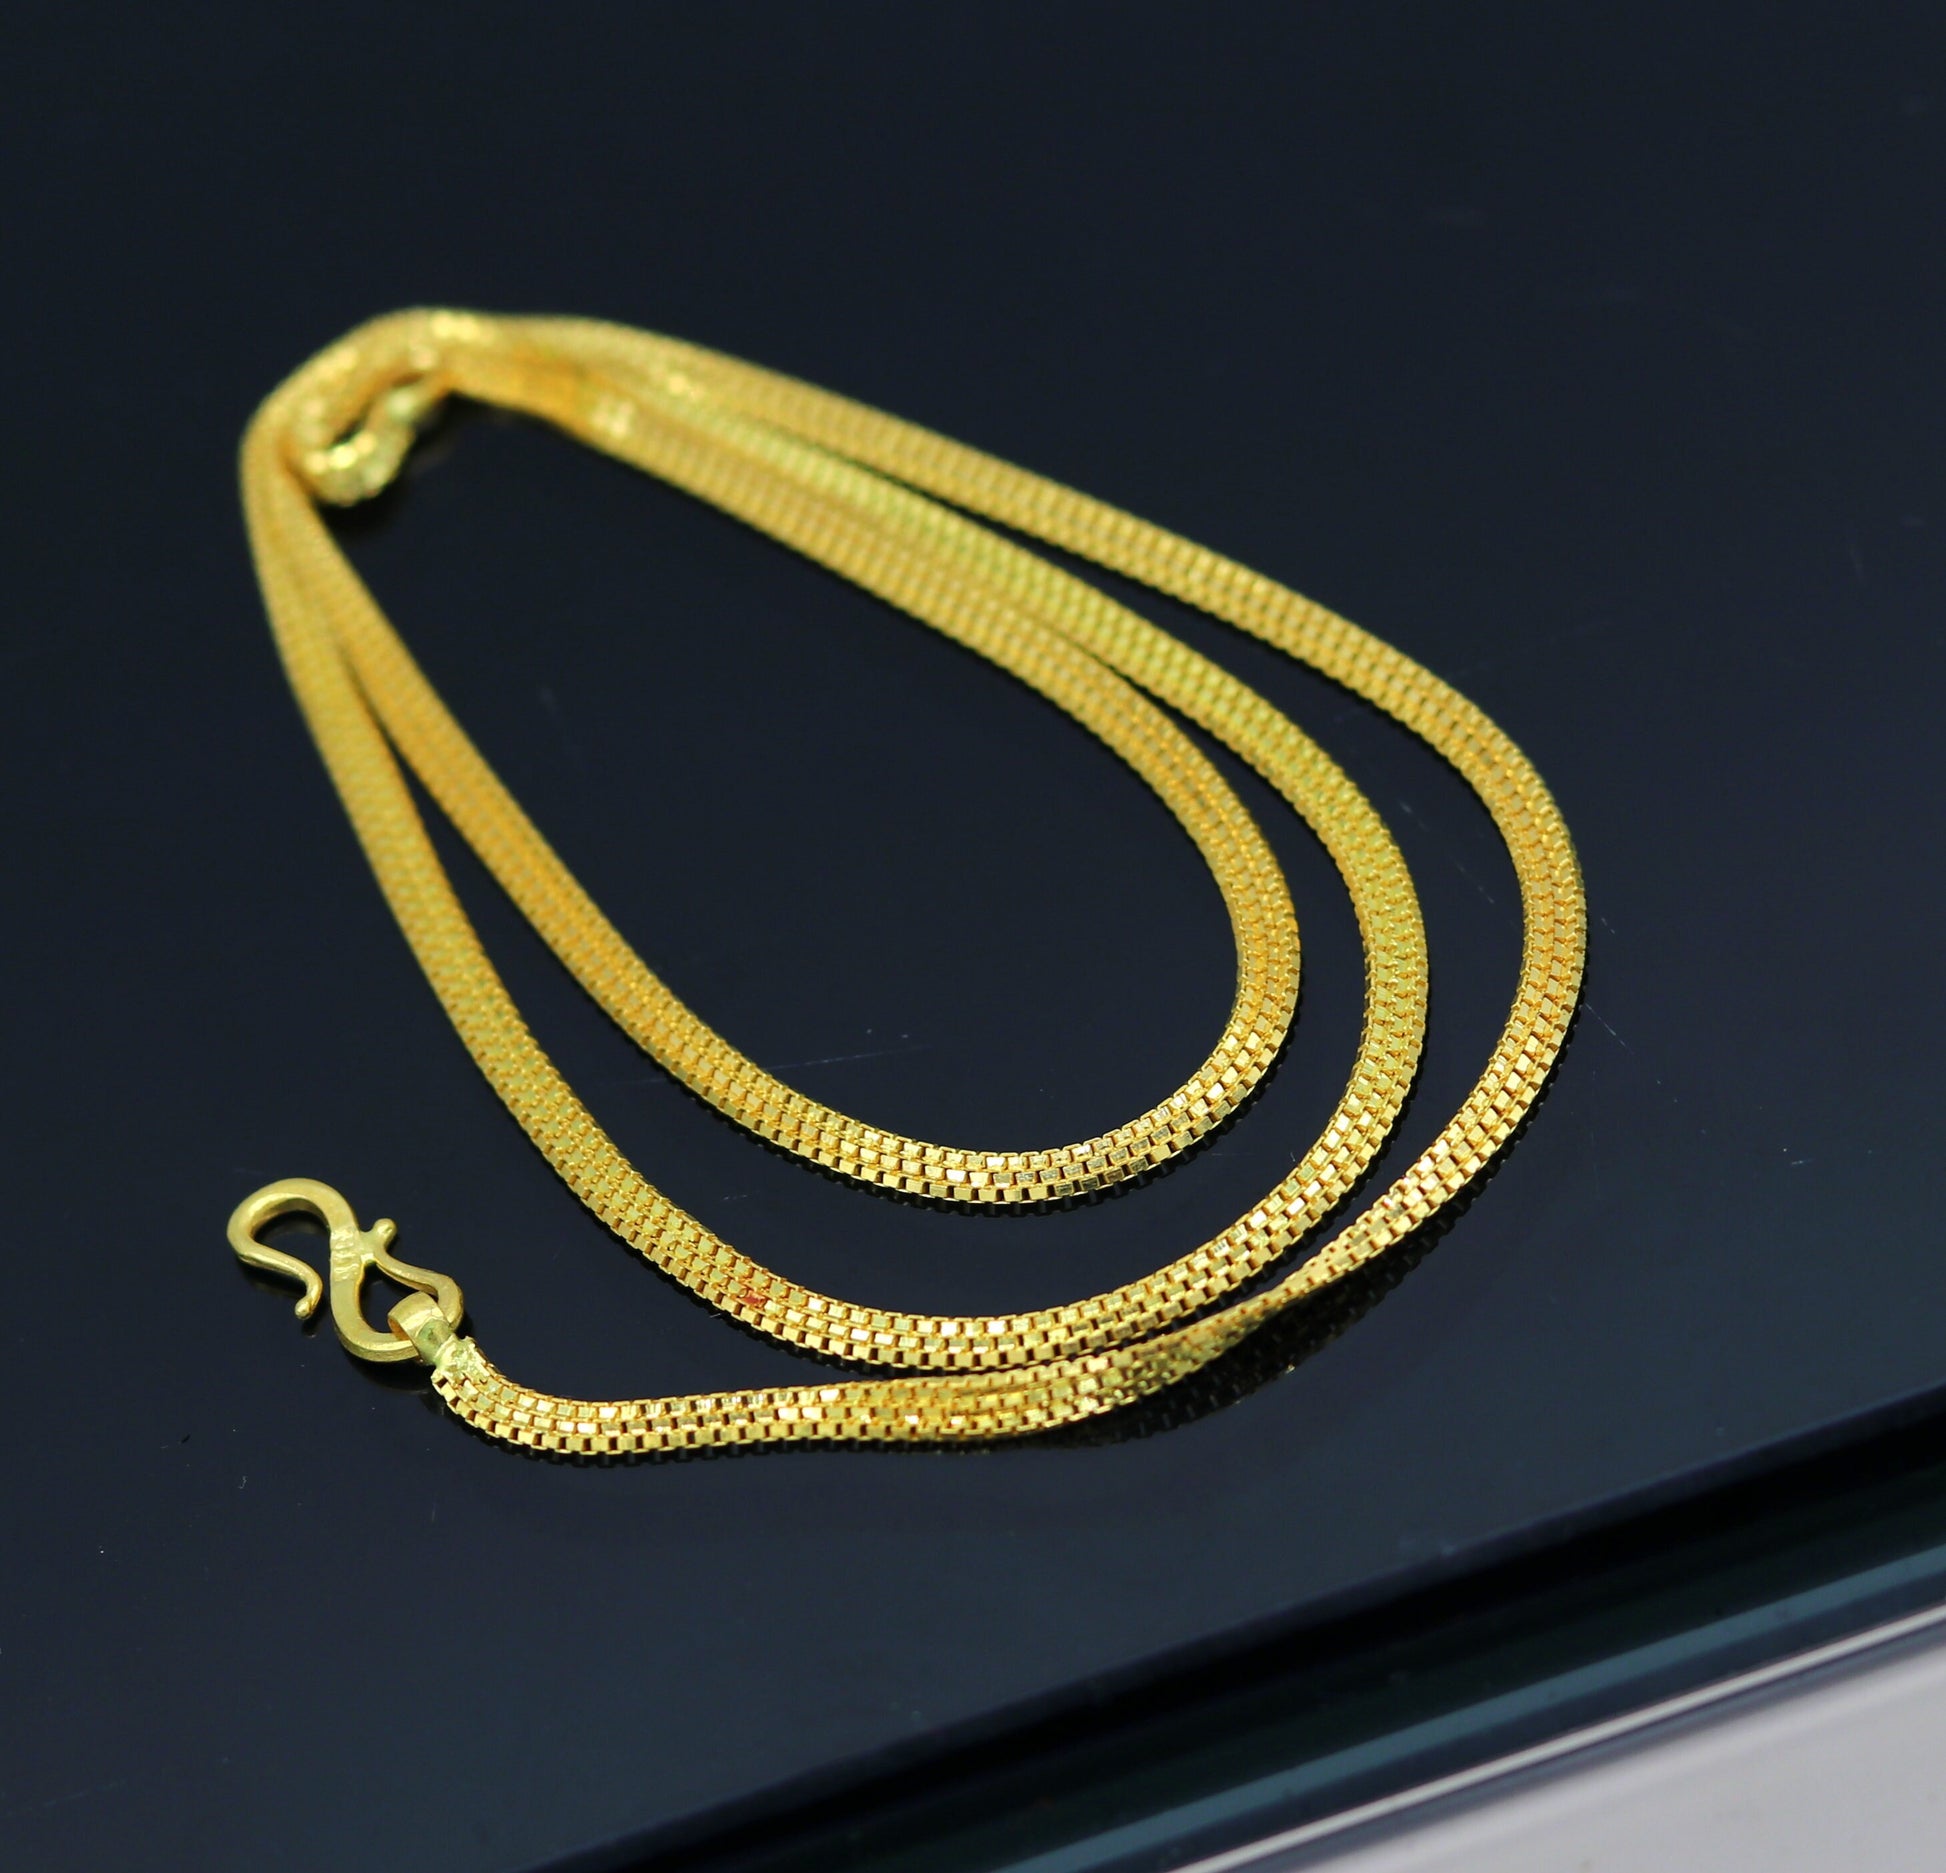 22kt yellow gold handmade triple box chain chain, amazing customized chain best gifting personalized unisex jewelry from india ch241 - TRIBAL ORNAMENTS